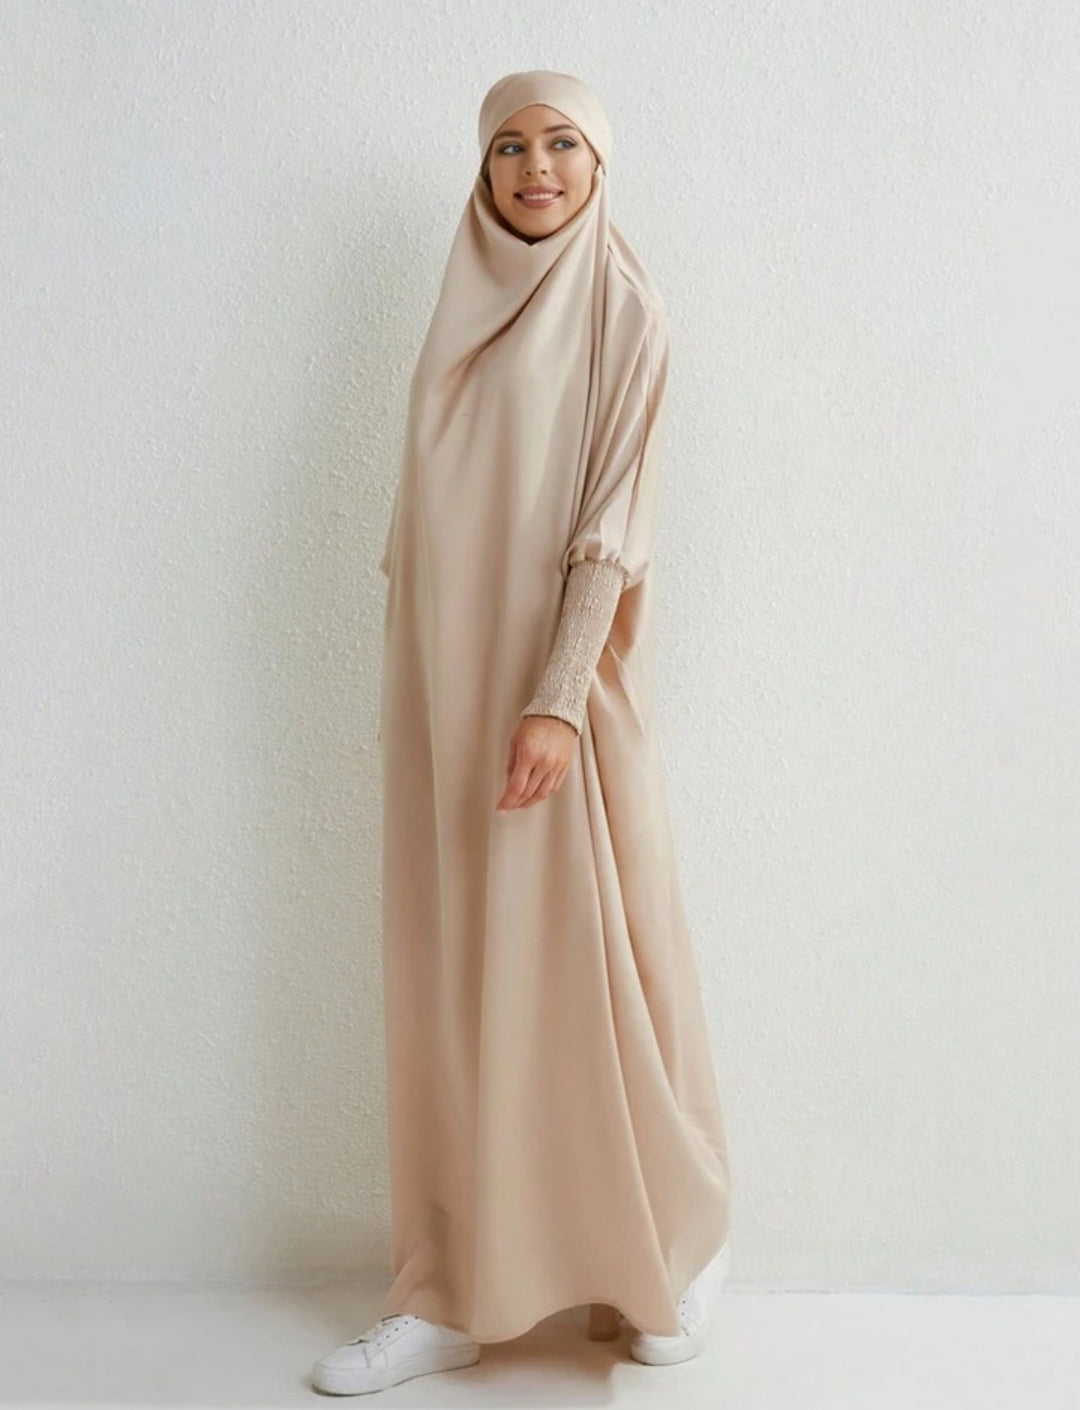 Introducing the epitome of refined modesty and timeless sophistication - the Satin Jilbab in Cream Beige, exclusively offered by Hikmah Boutique. Immerse yourself in the luxurious embrace of satin fabric meticulously tailored to perfection, promising an unparalleled experience of grace and elegance. 